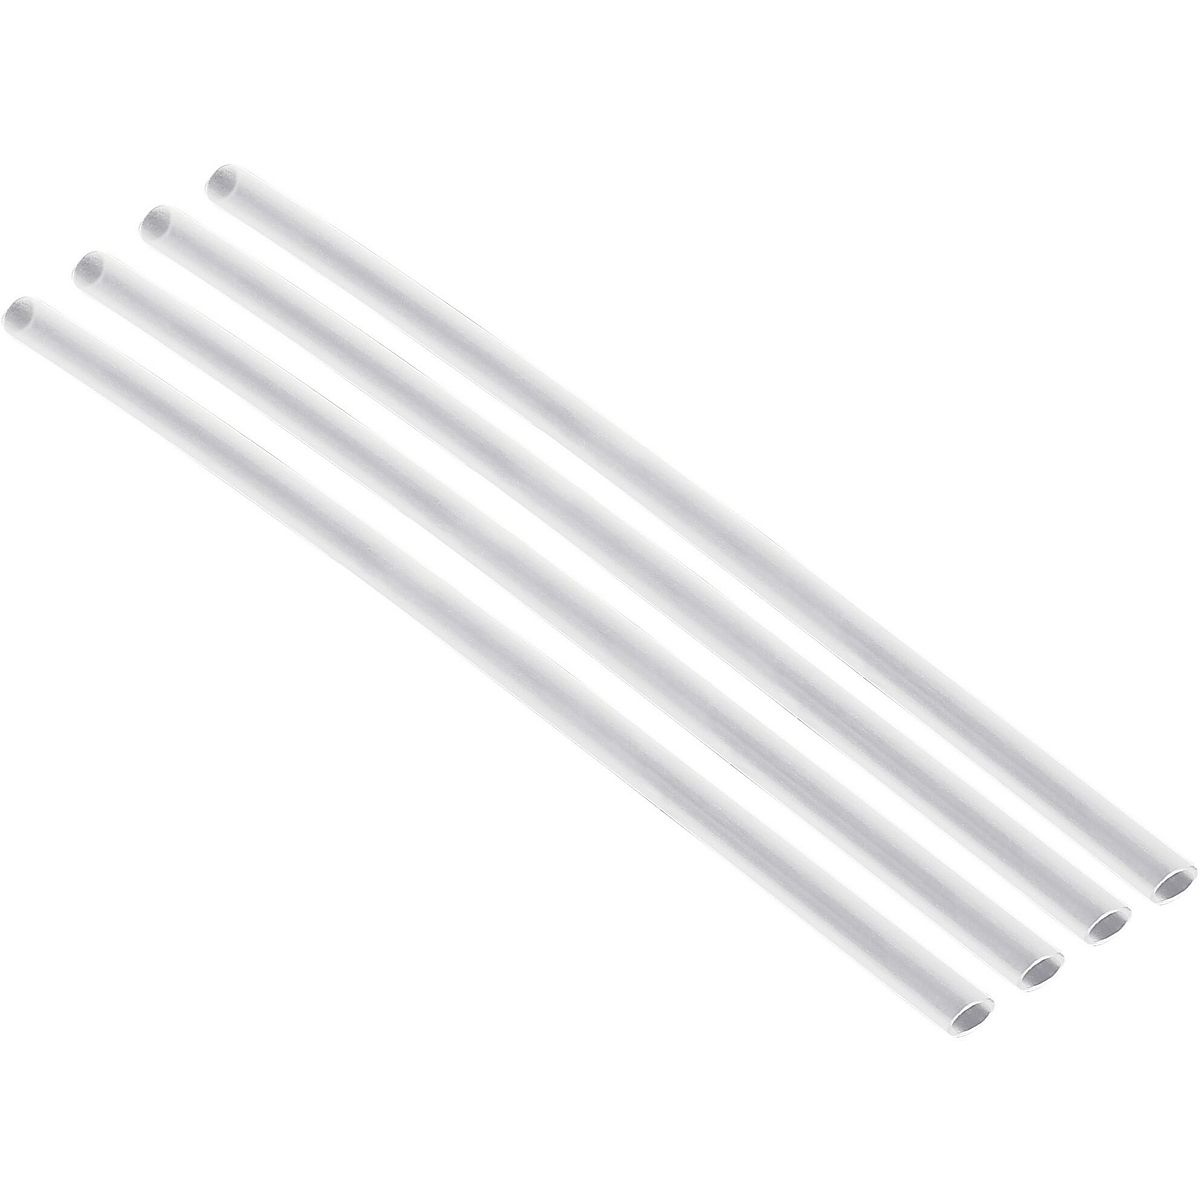 TRIANU 6 Pack Stainless Steel Straw Replacement 40 oz for Stanley